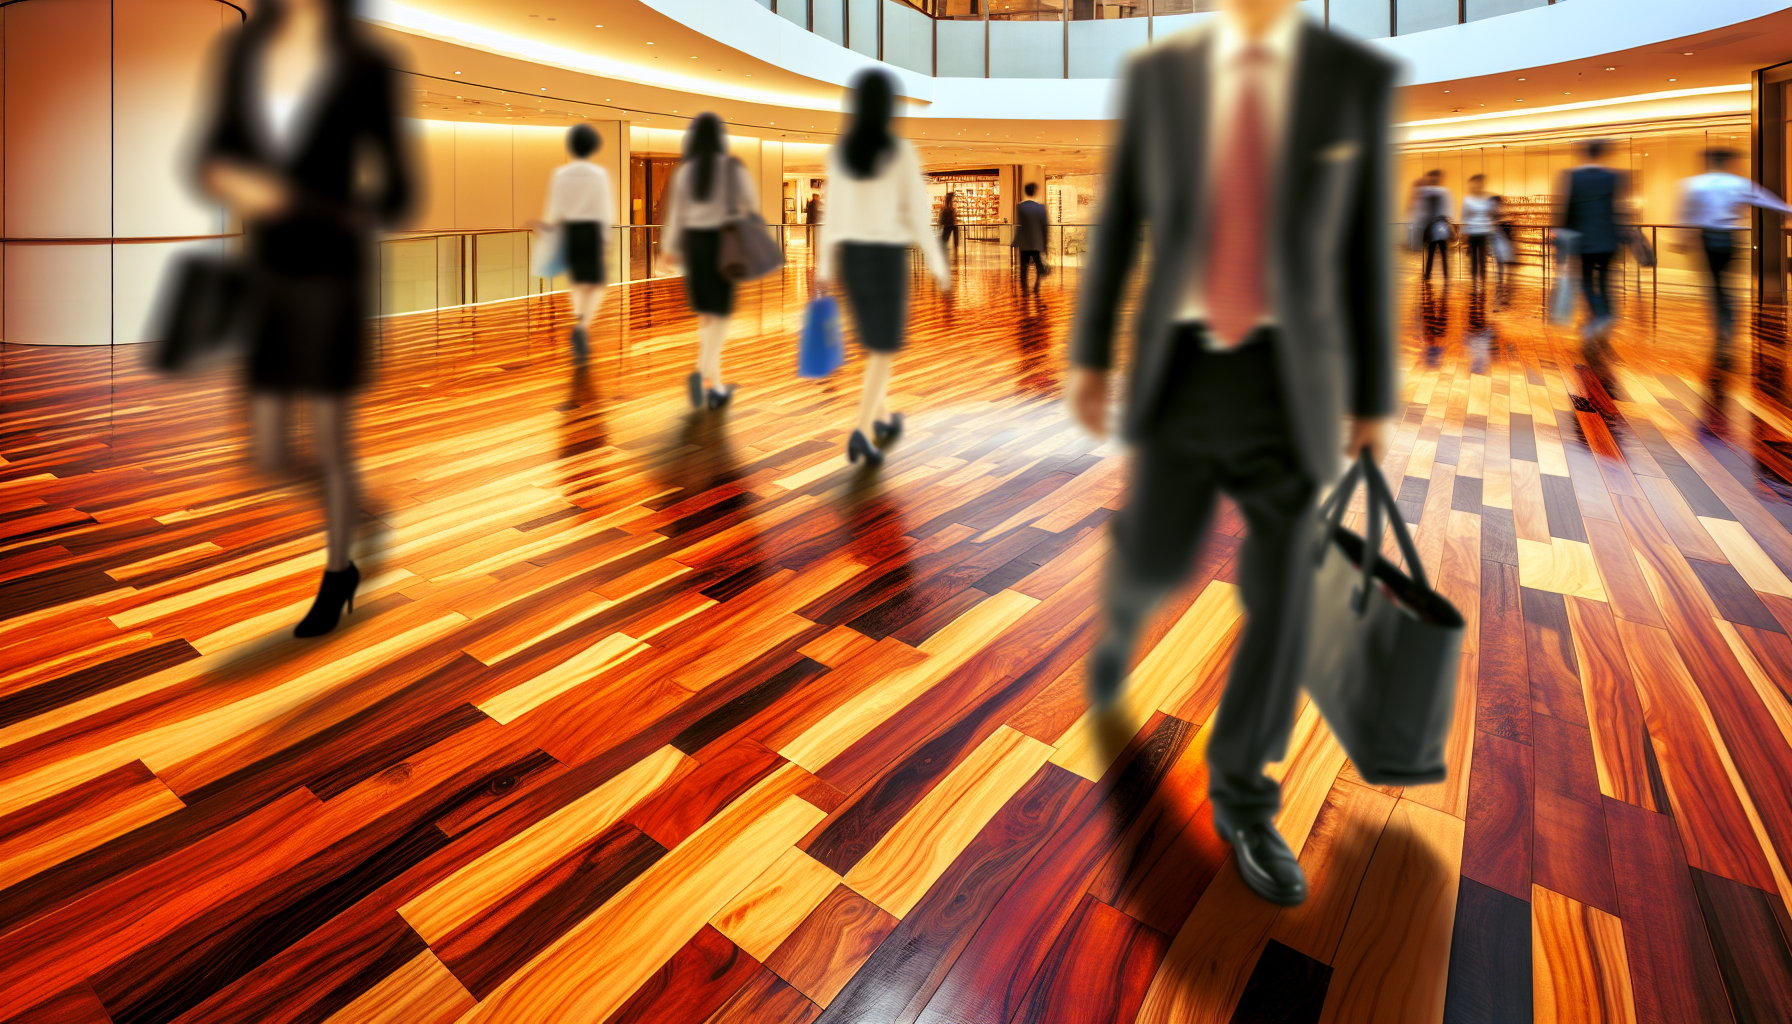 Resistant to wear and tear: hardwood floors in high-traffic areas